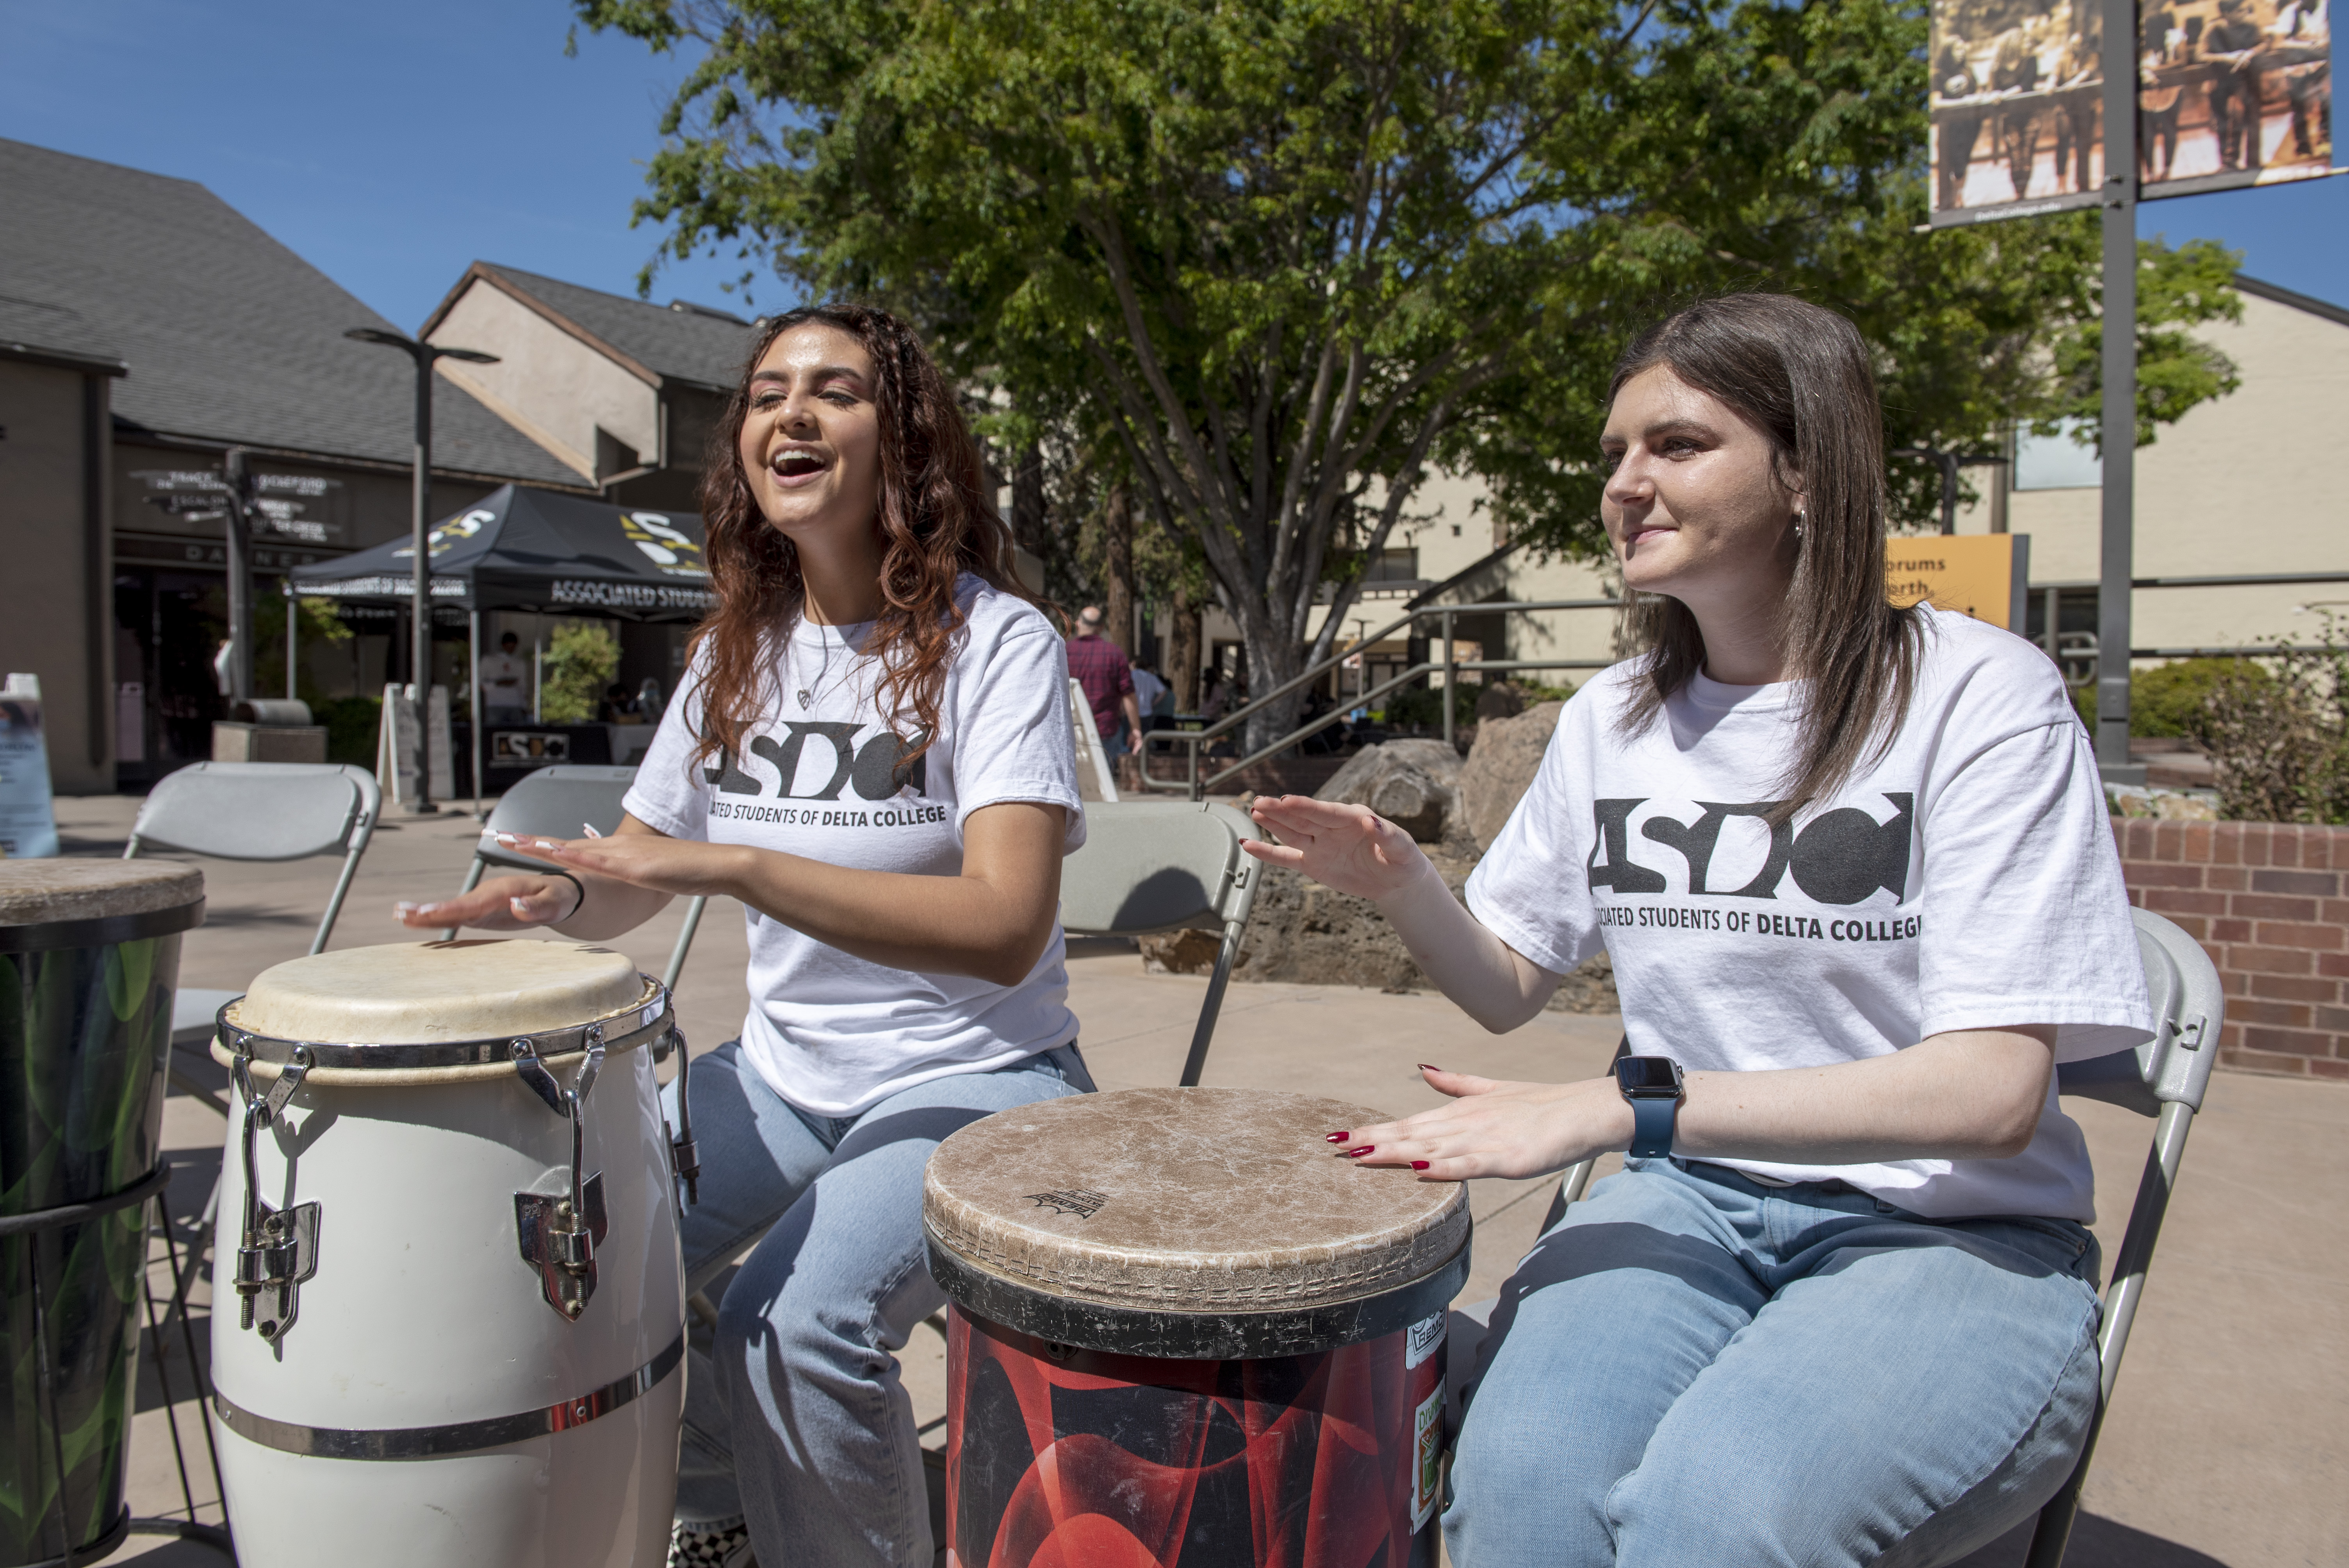 Drummers in the Delta College quad